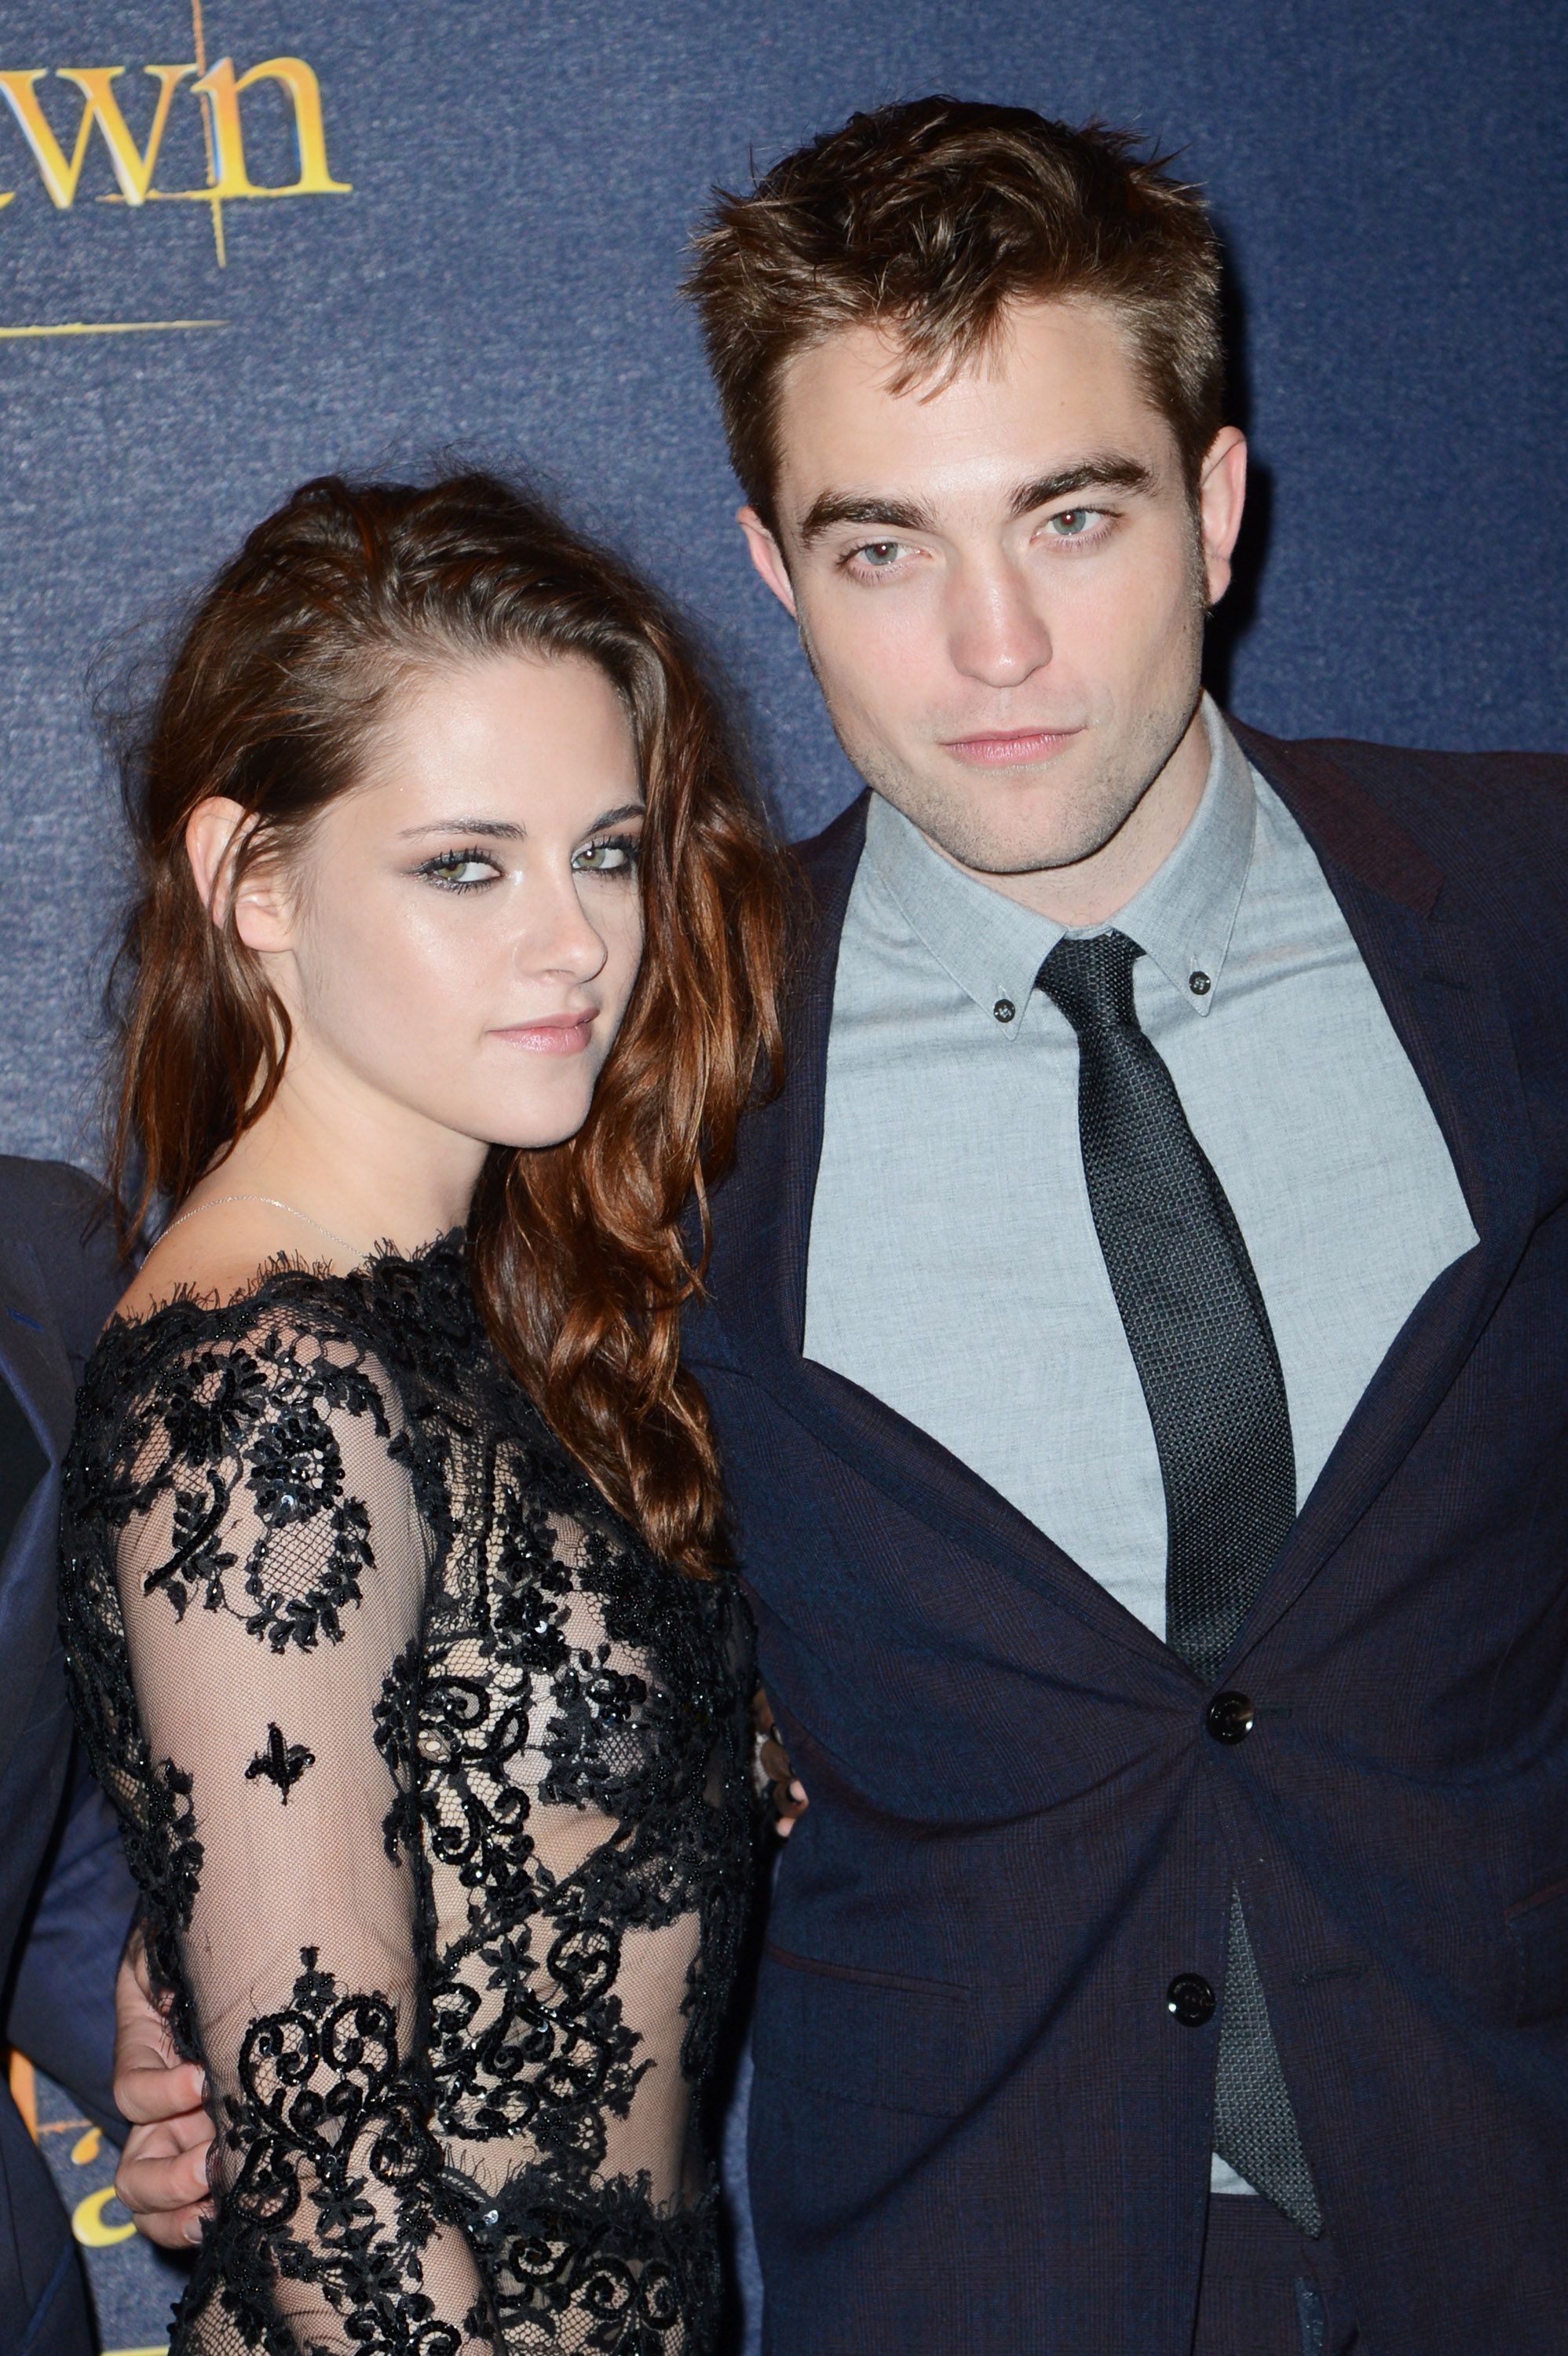 Kristen Stewart and Robert Pattinson during the UK Premiere of 'The Twilight Saga: Breaking Dawn - Part 2' at Odeon Leicester Square on November 14, 2012 in London, England. | Source: Getty Images